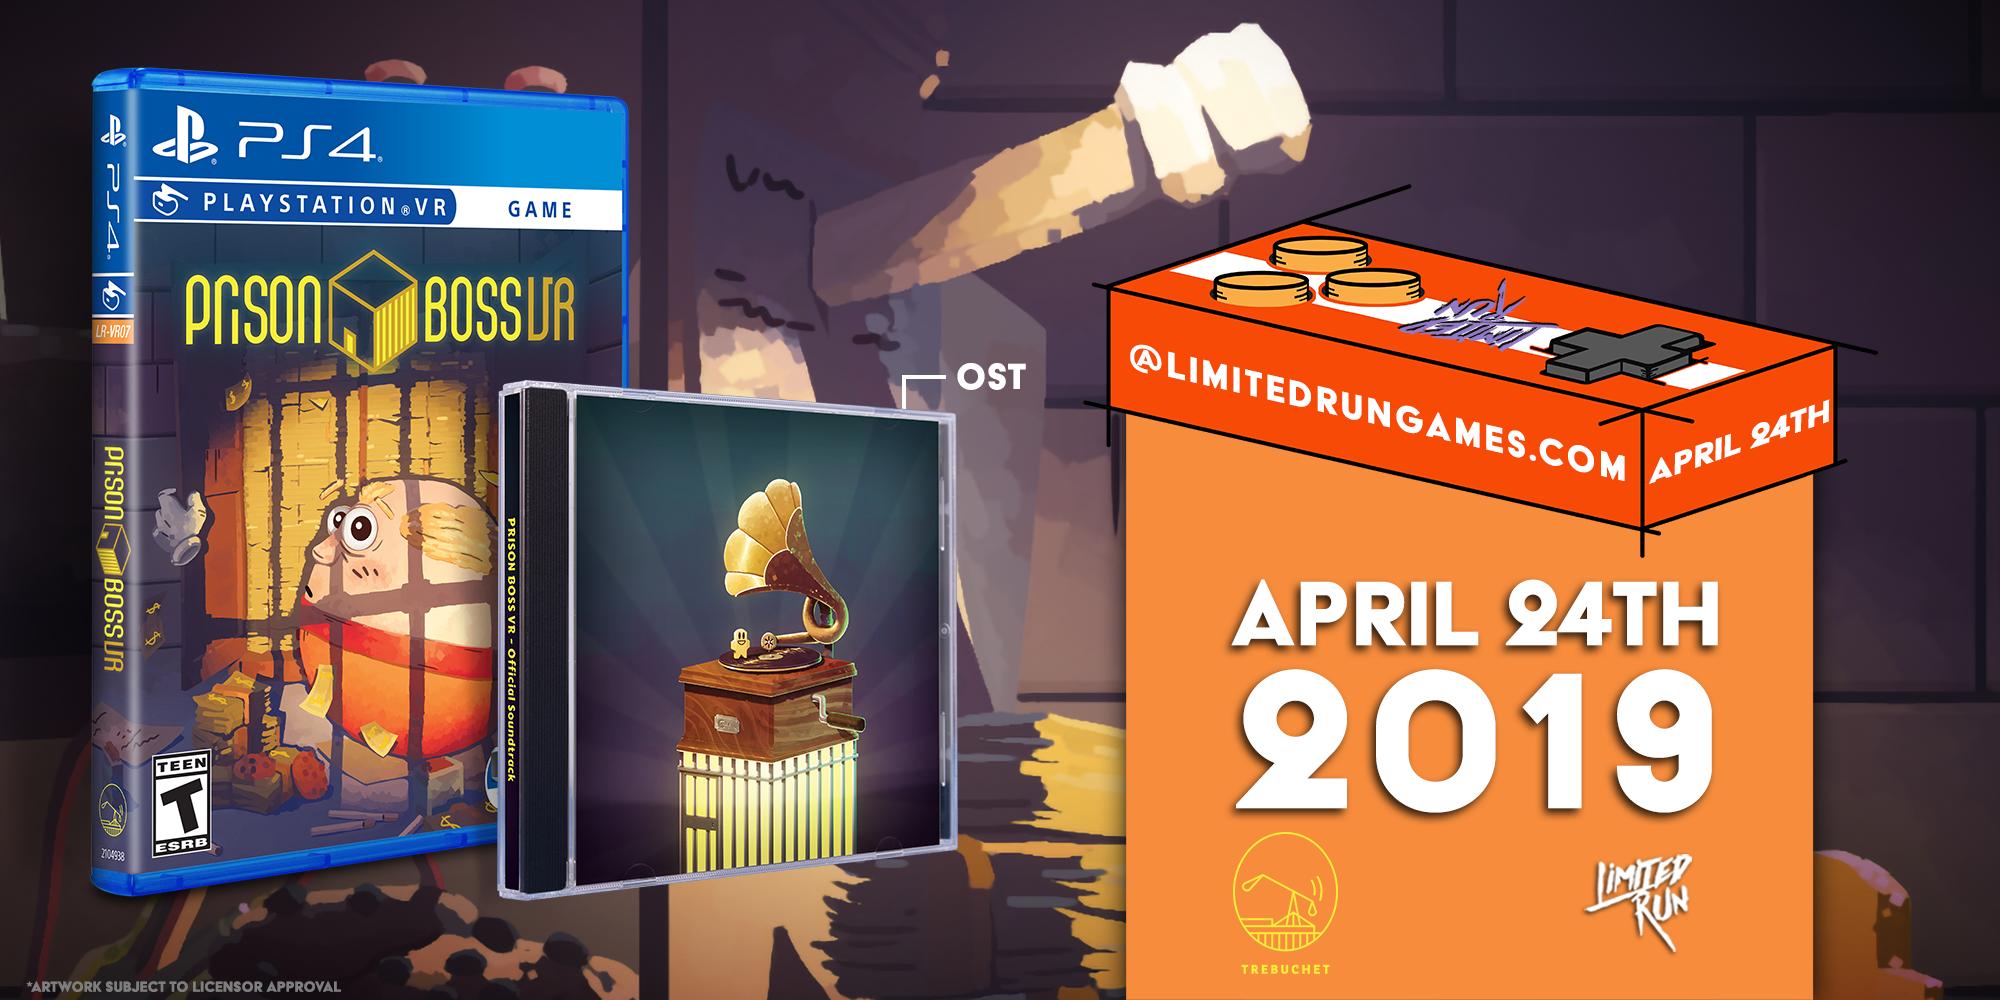 Limited Run Games on Twitter: "Prison Boss VR gets a Limited Run on PSVR tomorrow at 10am EDT! You can grab the game standalone standard edition, or bundle it with